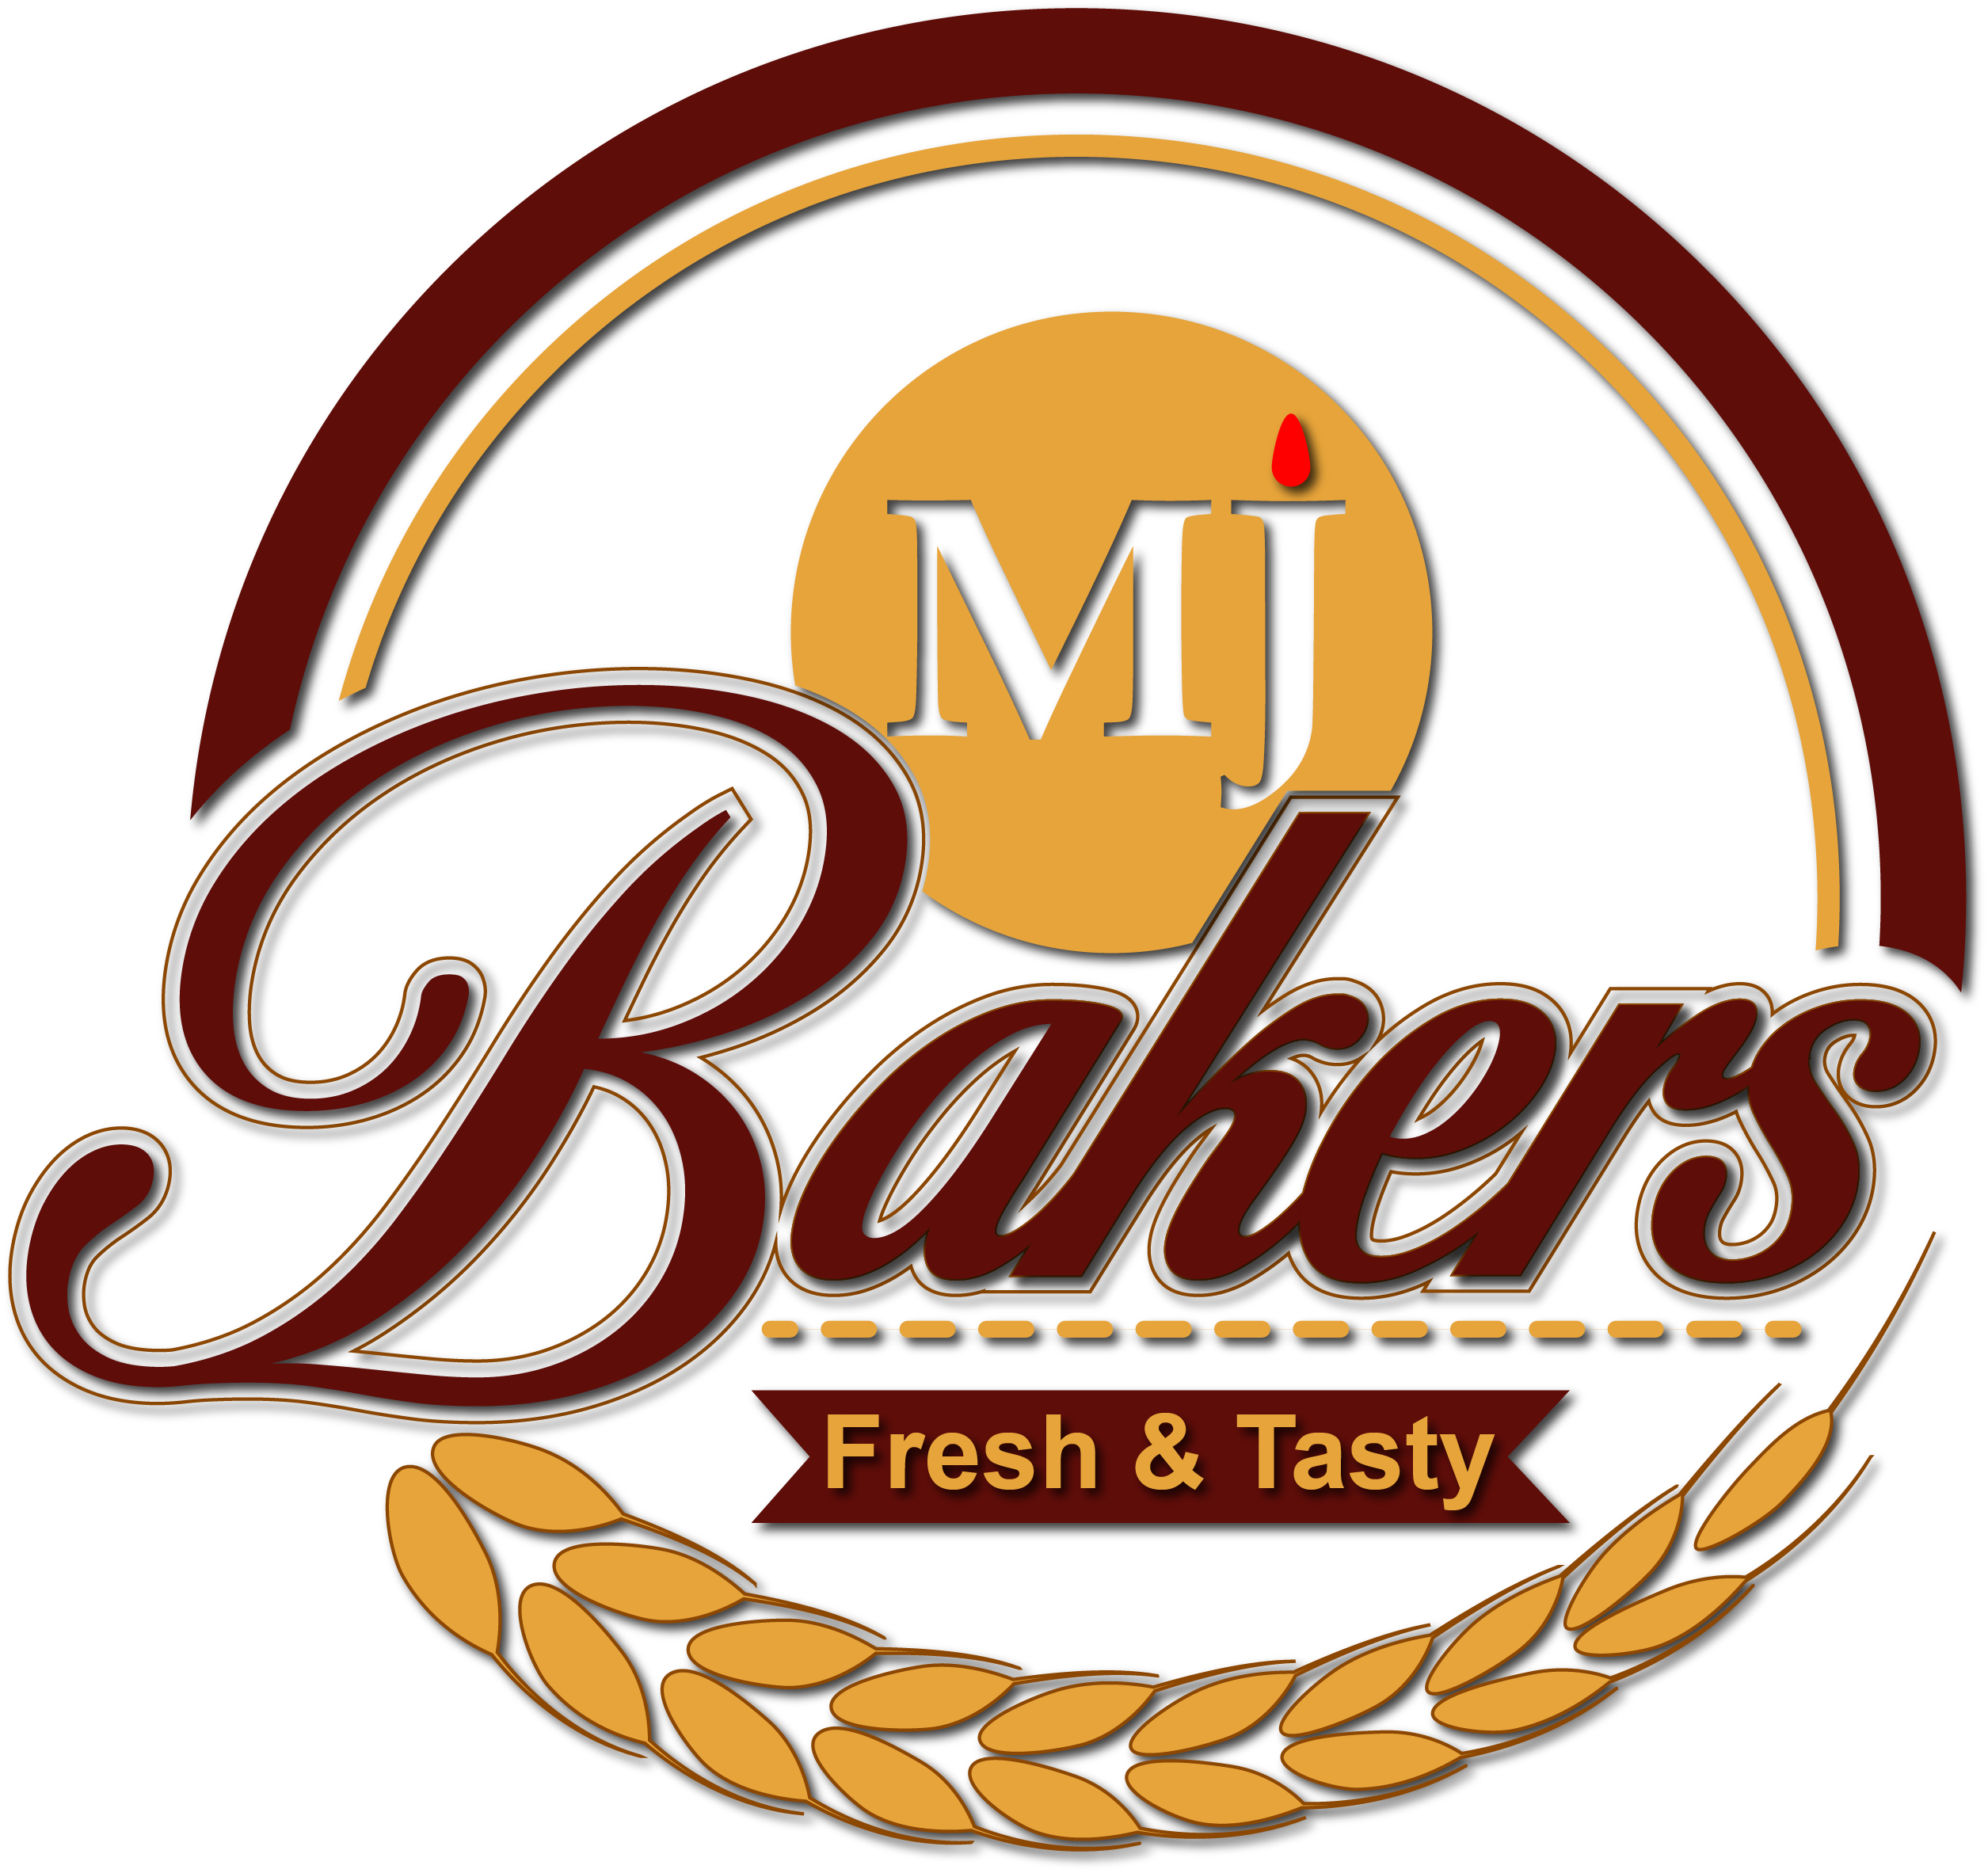 MJ bakers - Bakery Product Brand of India,rajgarh,Hotels & Resorts,Bakery,77traders